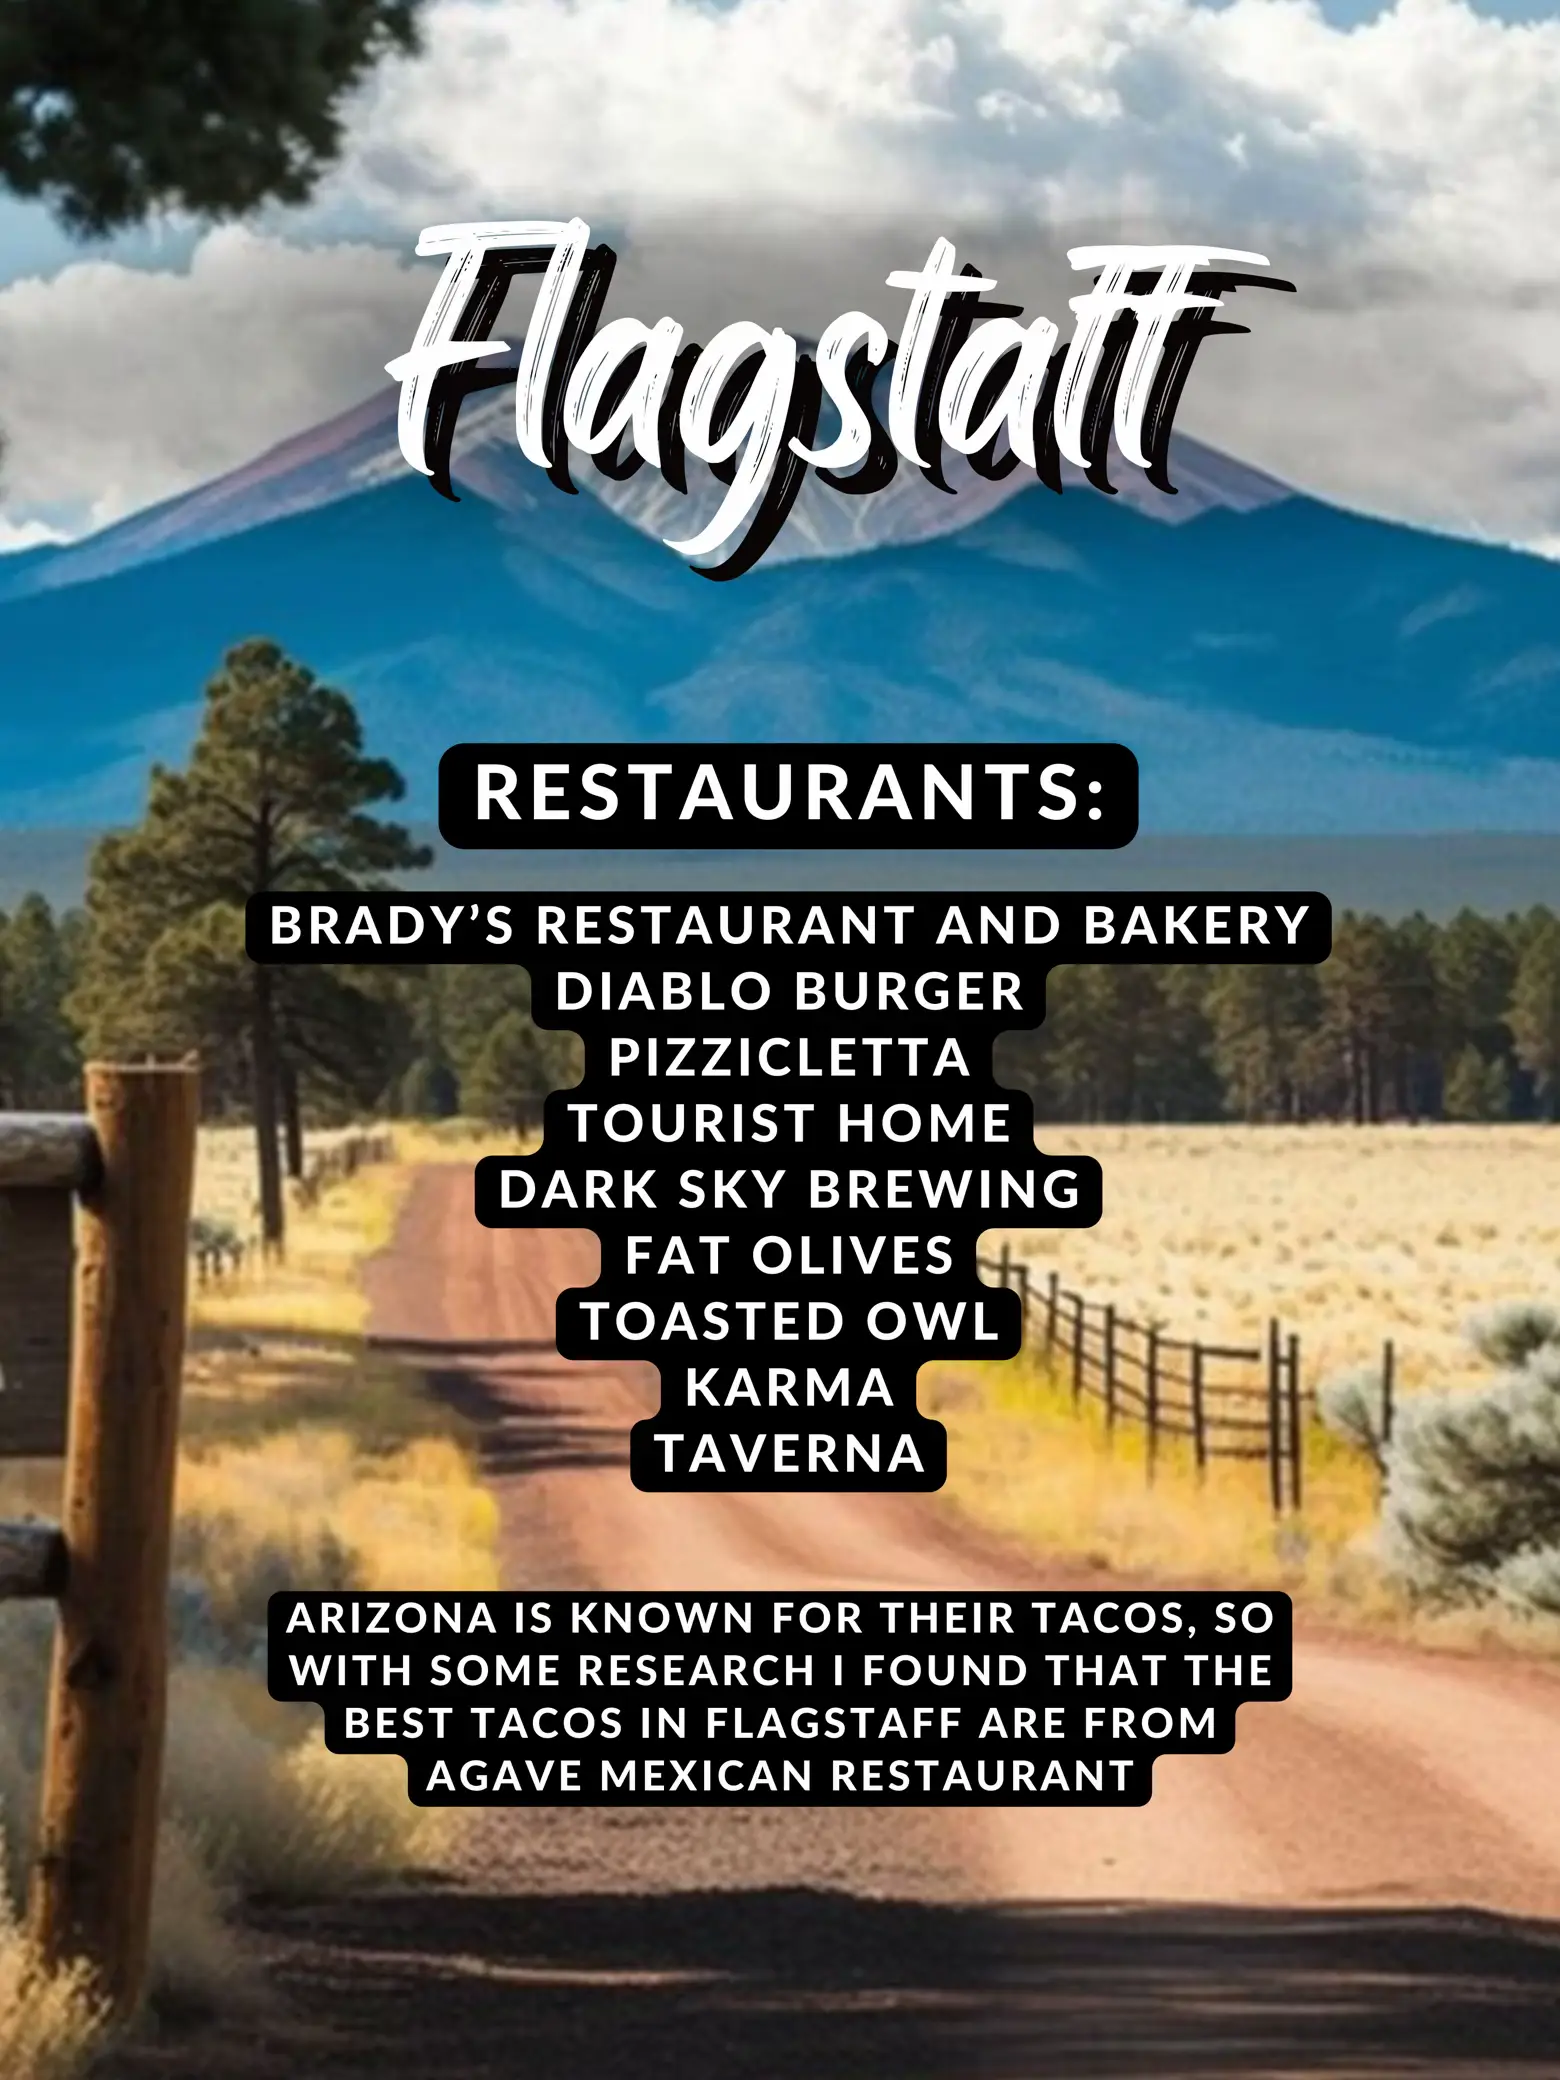  A picture of a mountain with the words "Hagstrom Restaurants: Brady's Restaurant and Bakery, Diablo Burger, Pizzitella, Tourist Home, Dark Sky Brewing, Fat Olives, TOASTed Owl, Karma